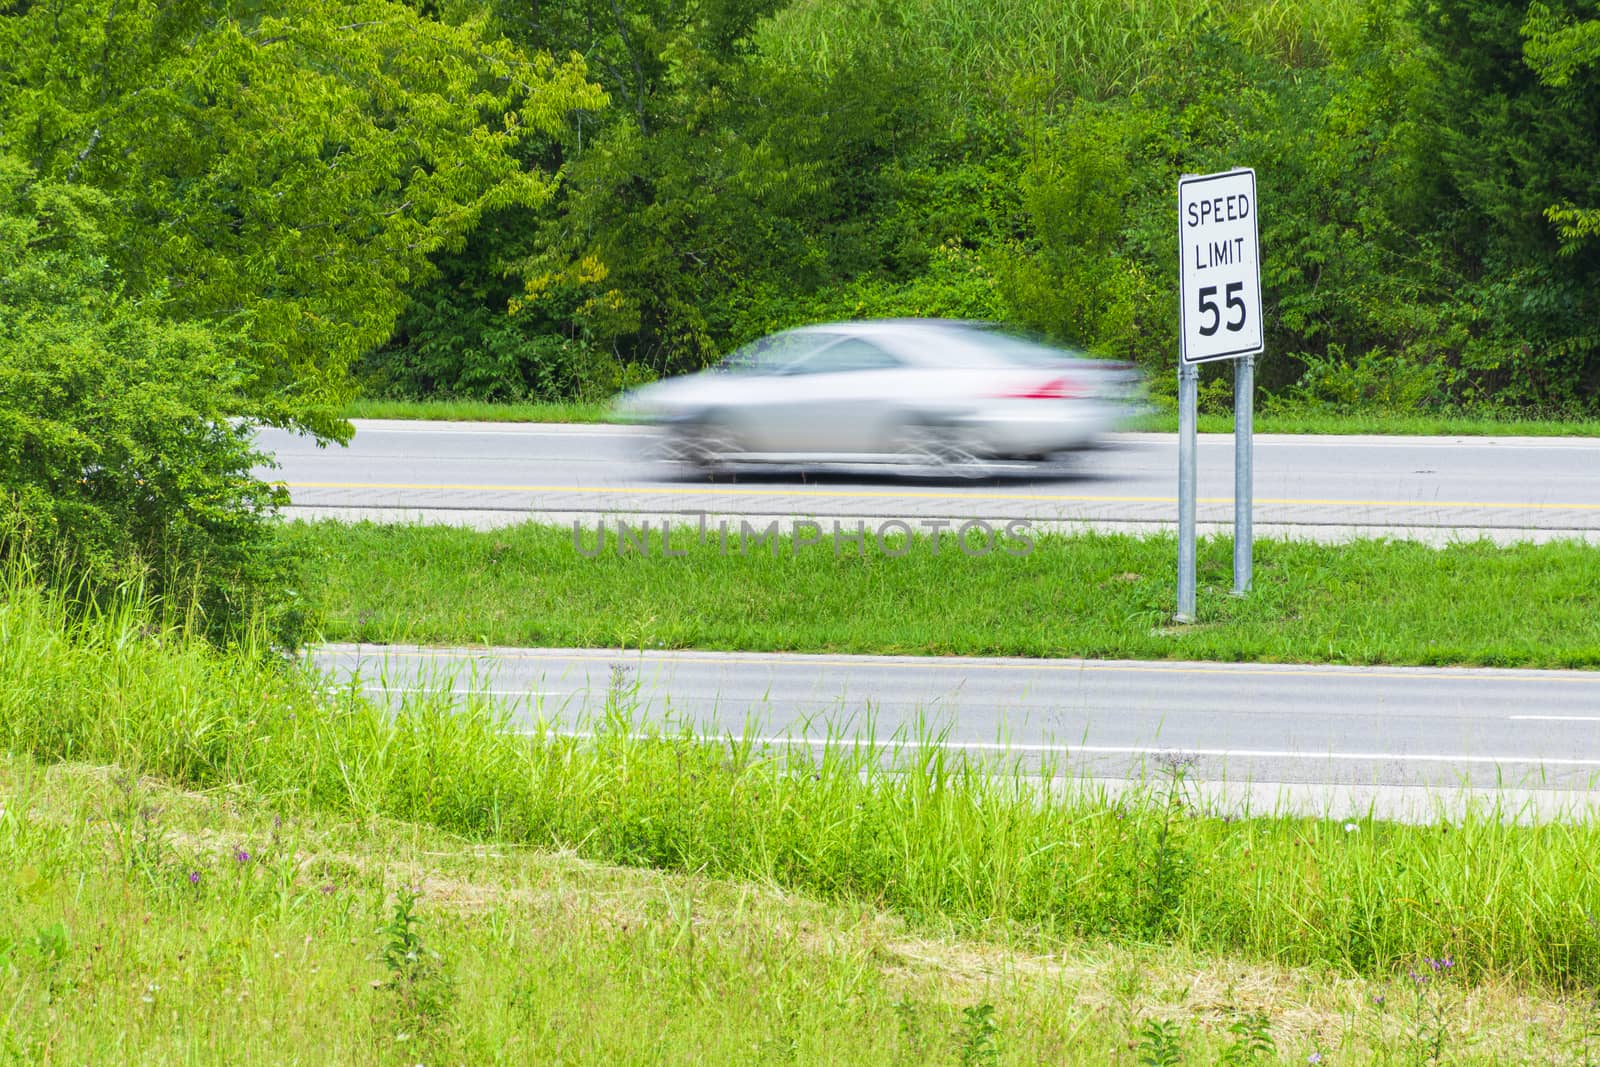 Horizontal shot of a speeding car streaking by a speed limit sign.  Blurring shows motion.